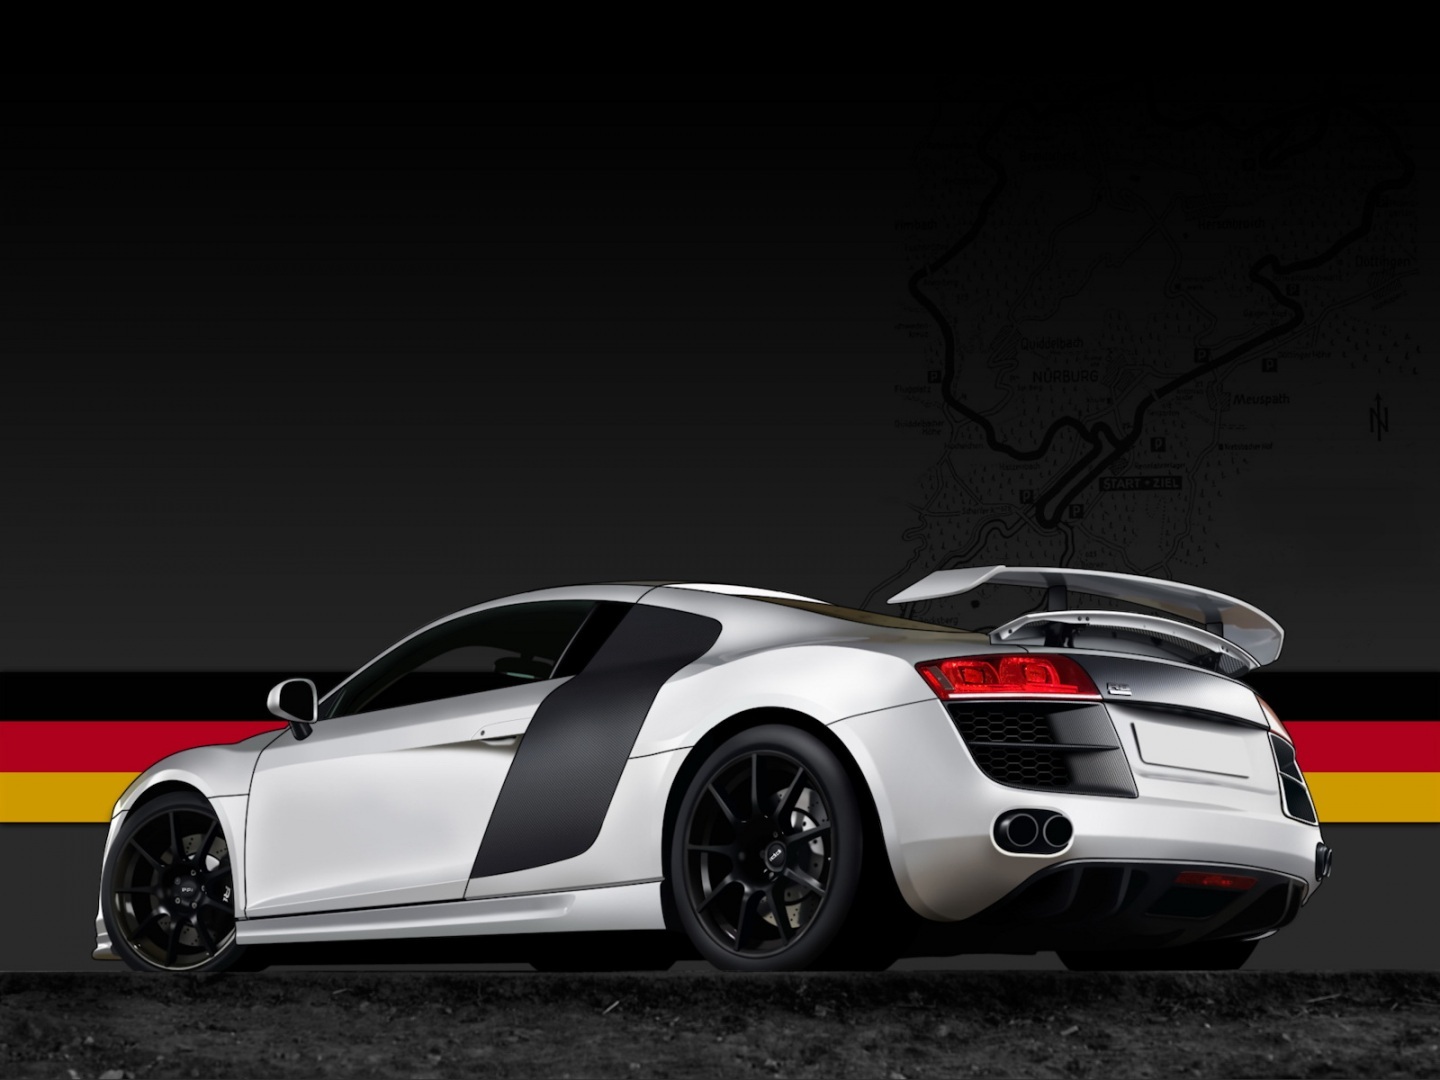 Car Wallpaper HD For Mobile Apps Kindle Fire Mobilemuscle